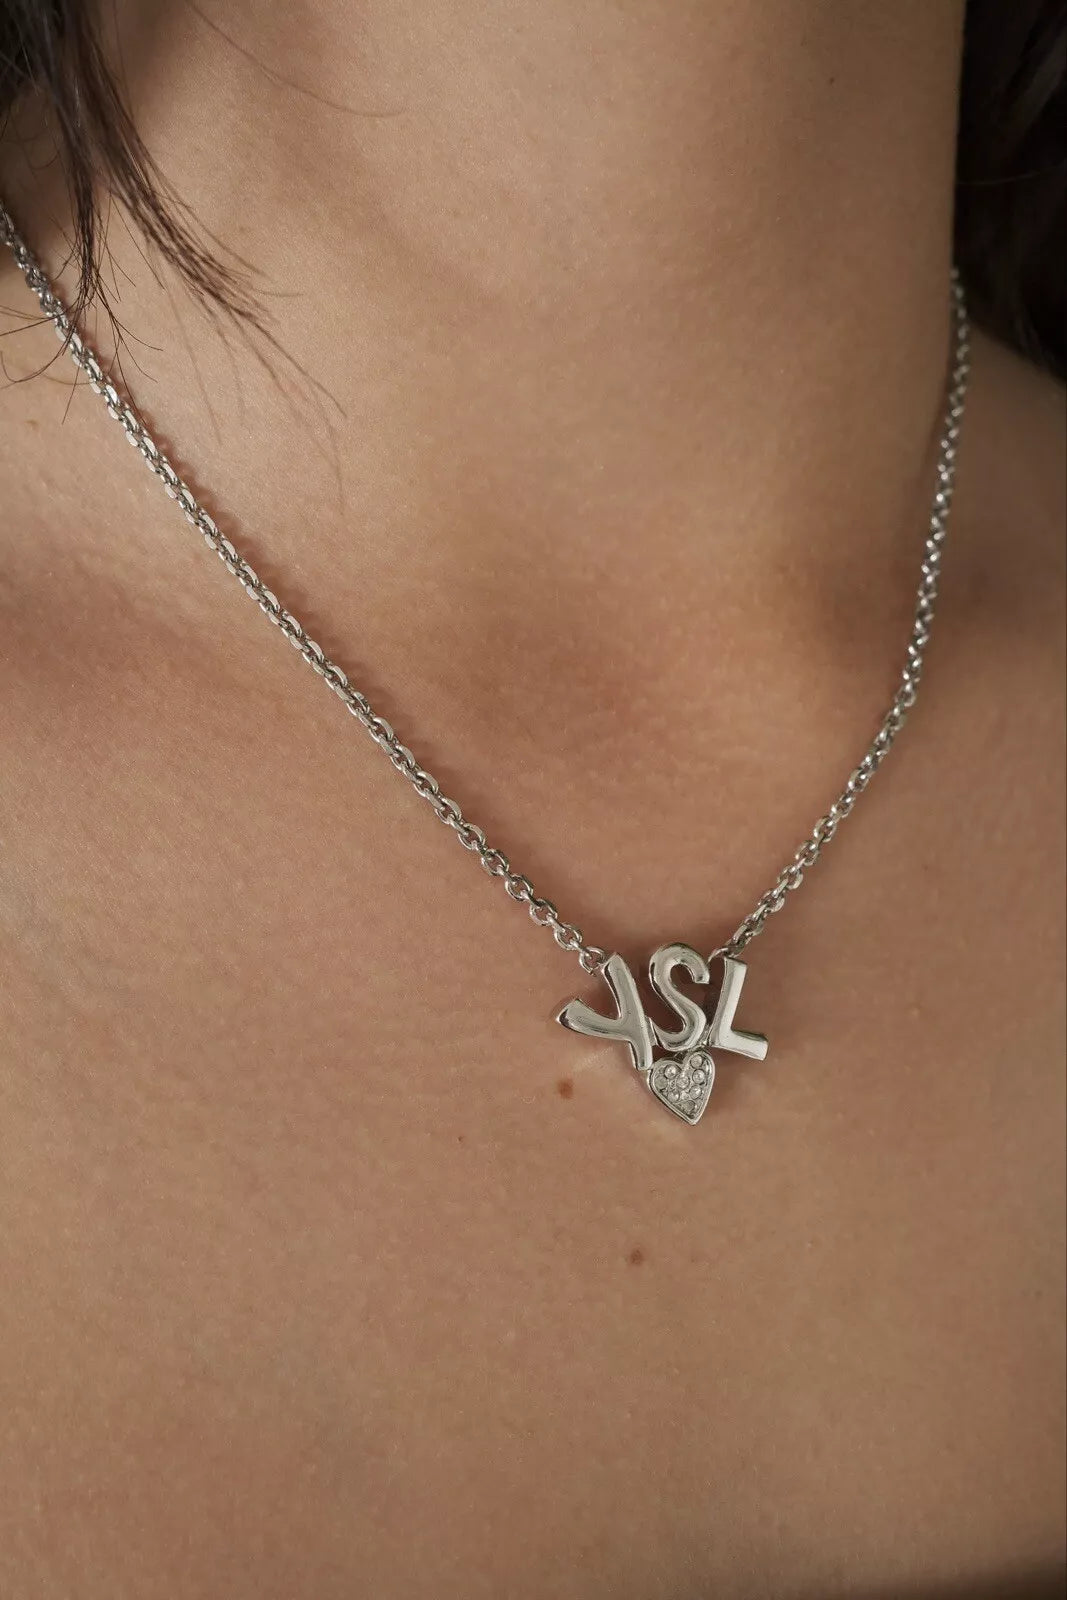 Yves Saint Laurent Silver YSL Vintage Necklace, Logo Heart Rhinestone Pendant Necklace Vintage Necklace, Dainty Necklace, Gift for women